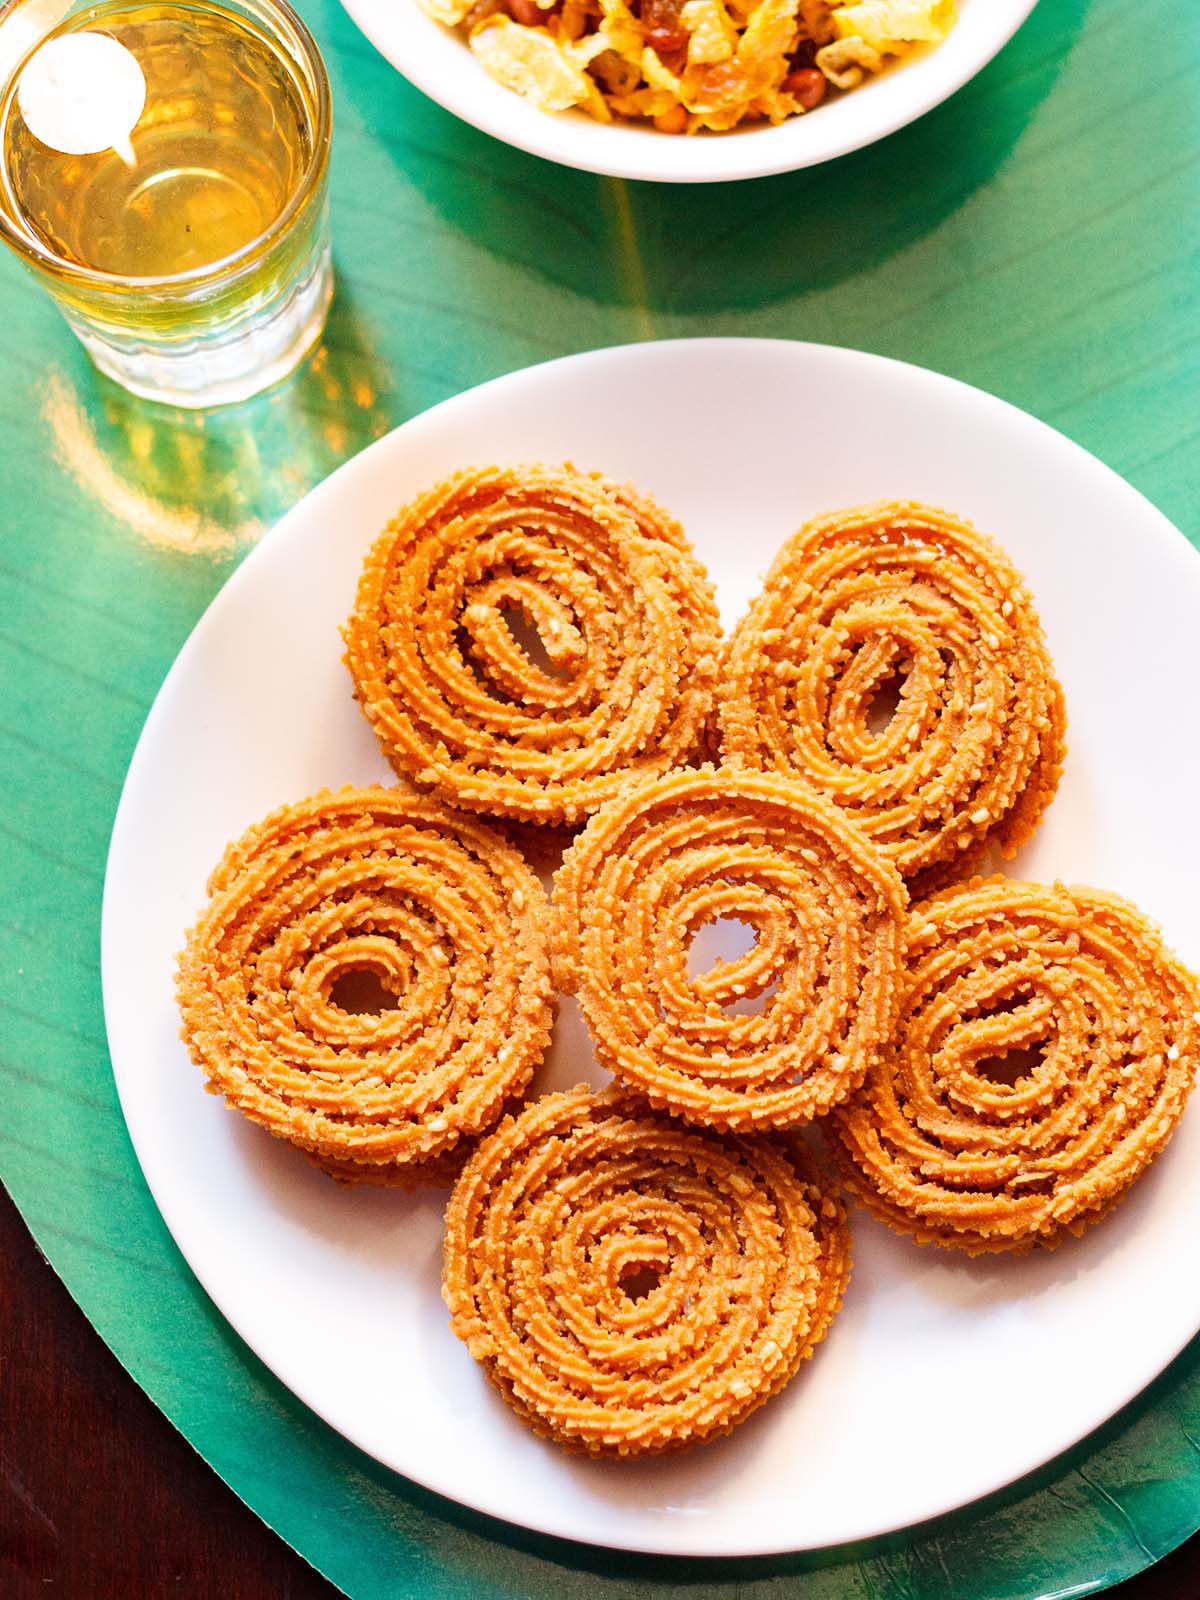 fchakli kept in a round circle with a chakli in the center on a white plate on a green background